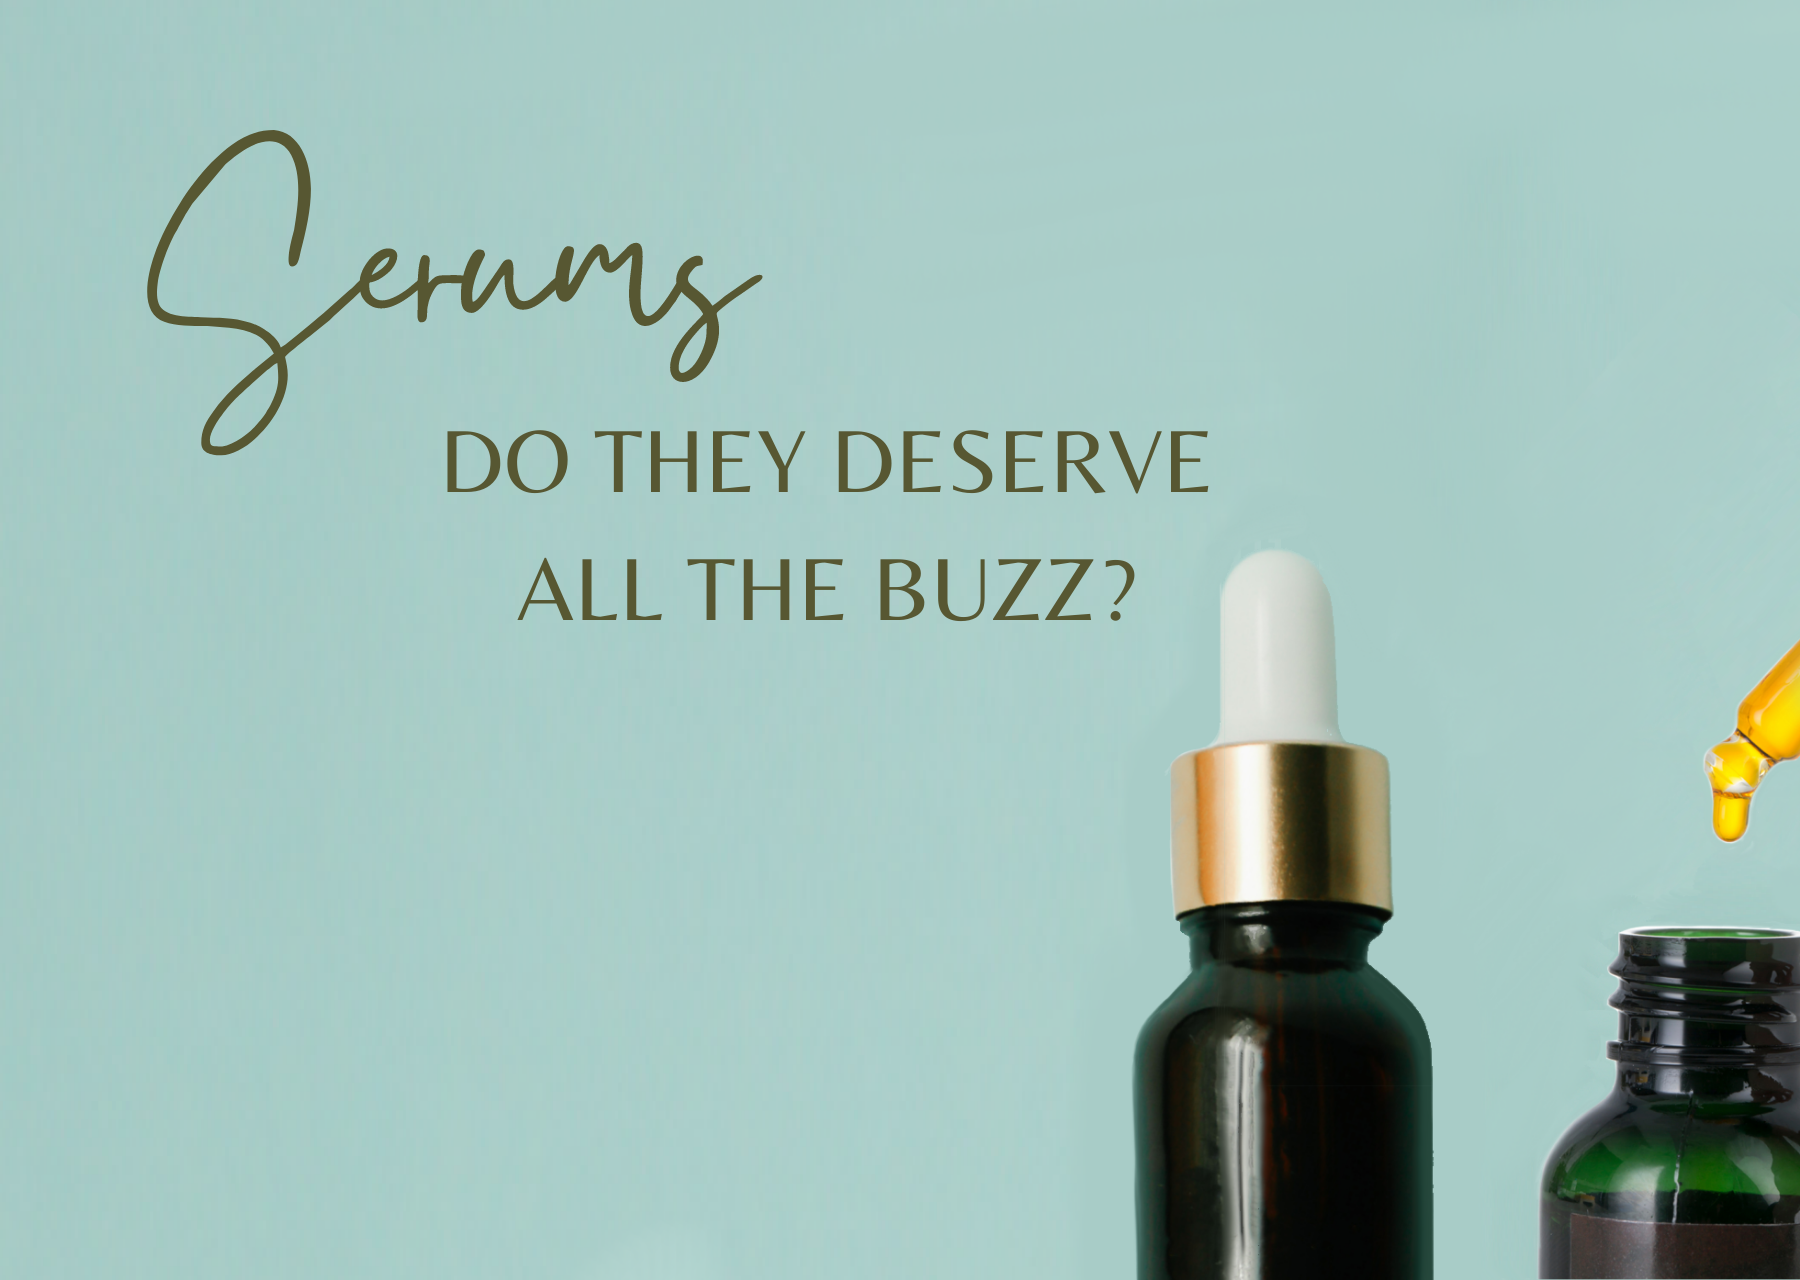 Serums, do they deserve all the buzz